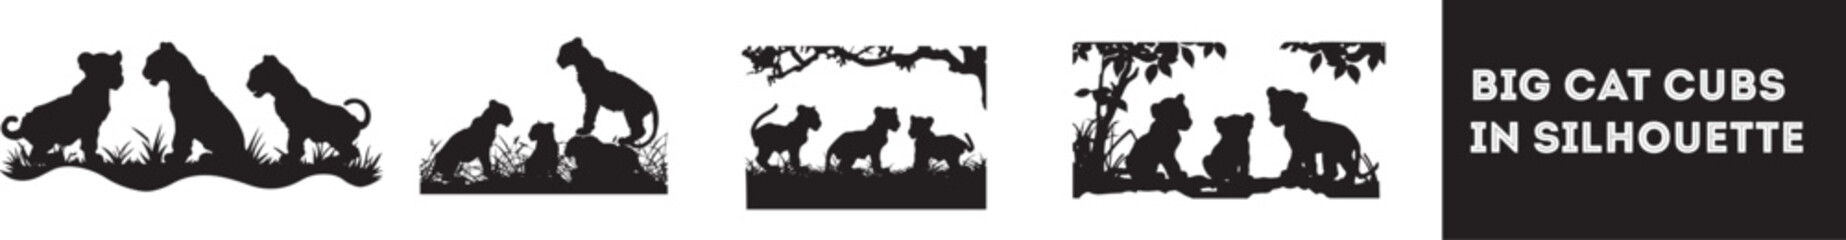 Set of Big cat cubs in silhouette stock illustration